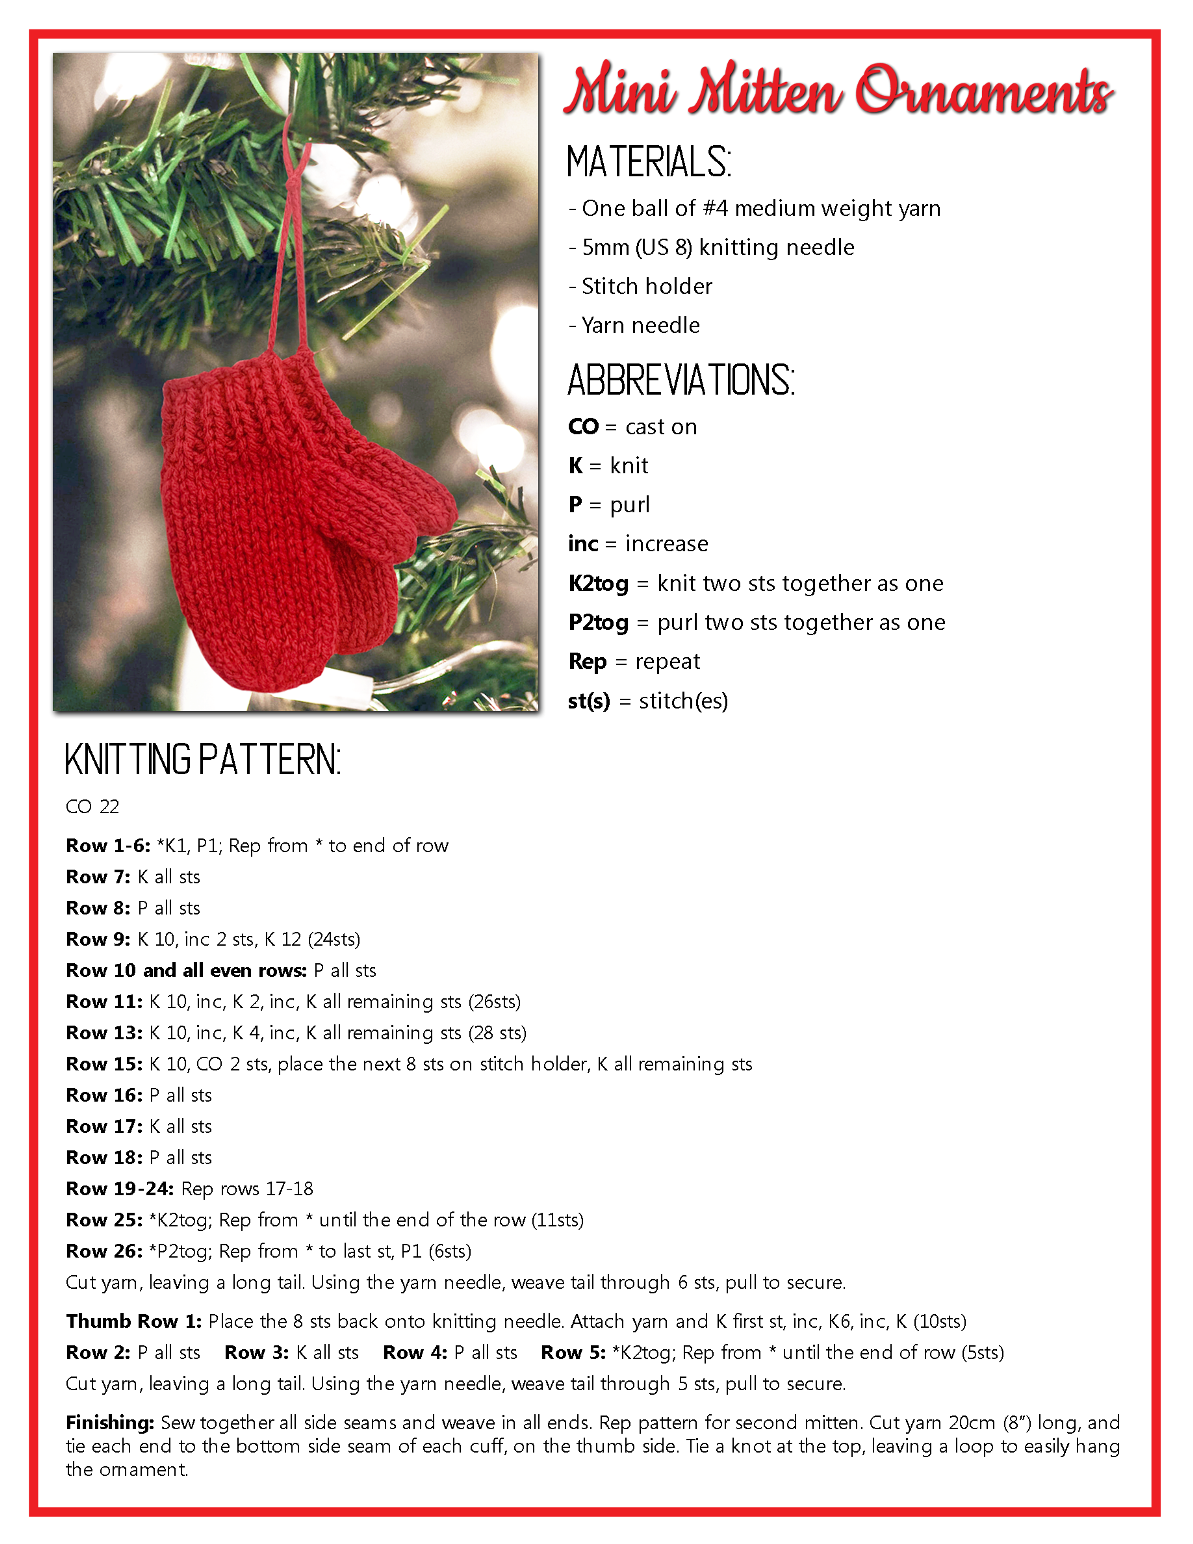 Steps to create your mitten ornaments